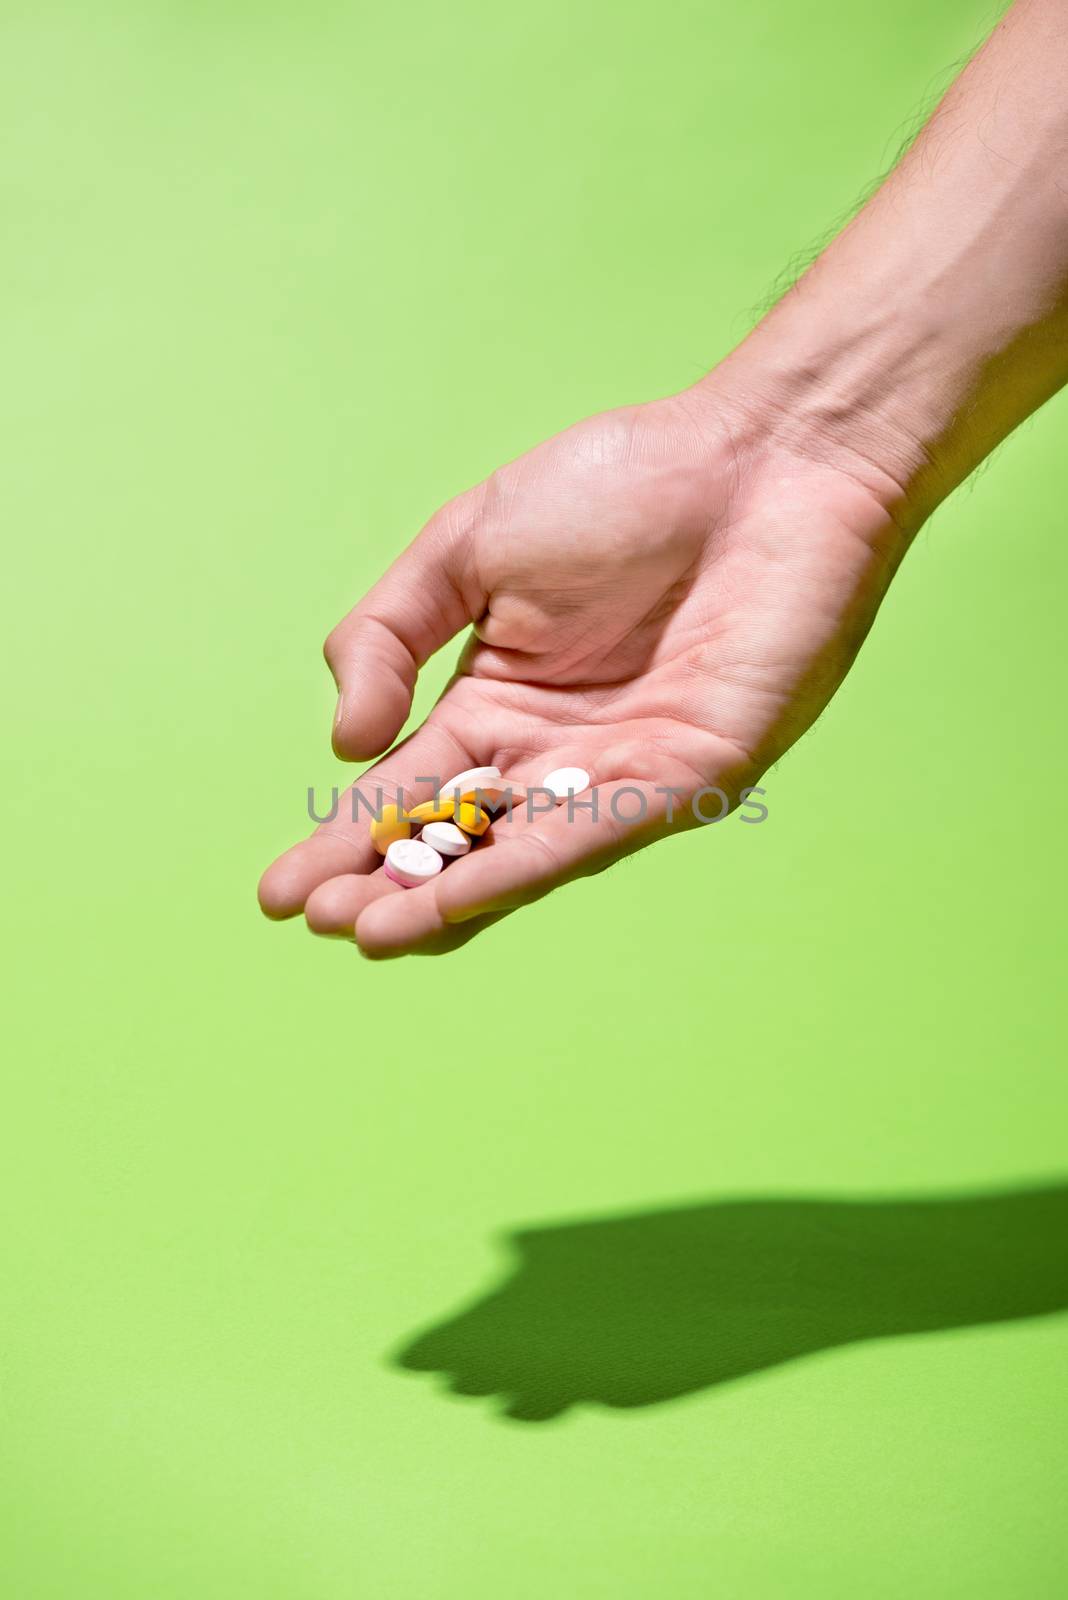 Colored pills in hand on green background. by makidotvn